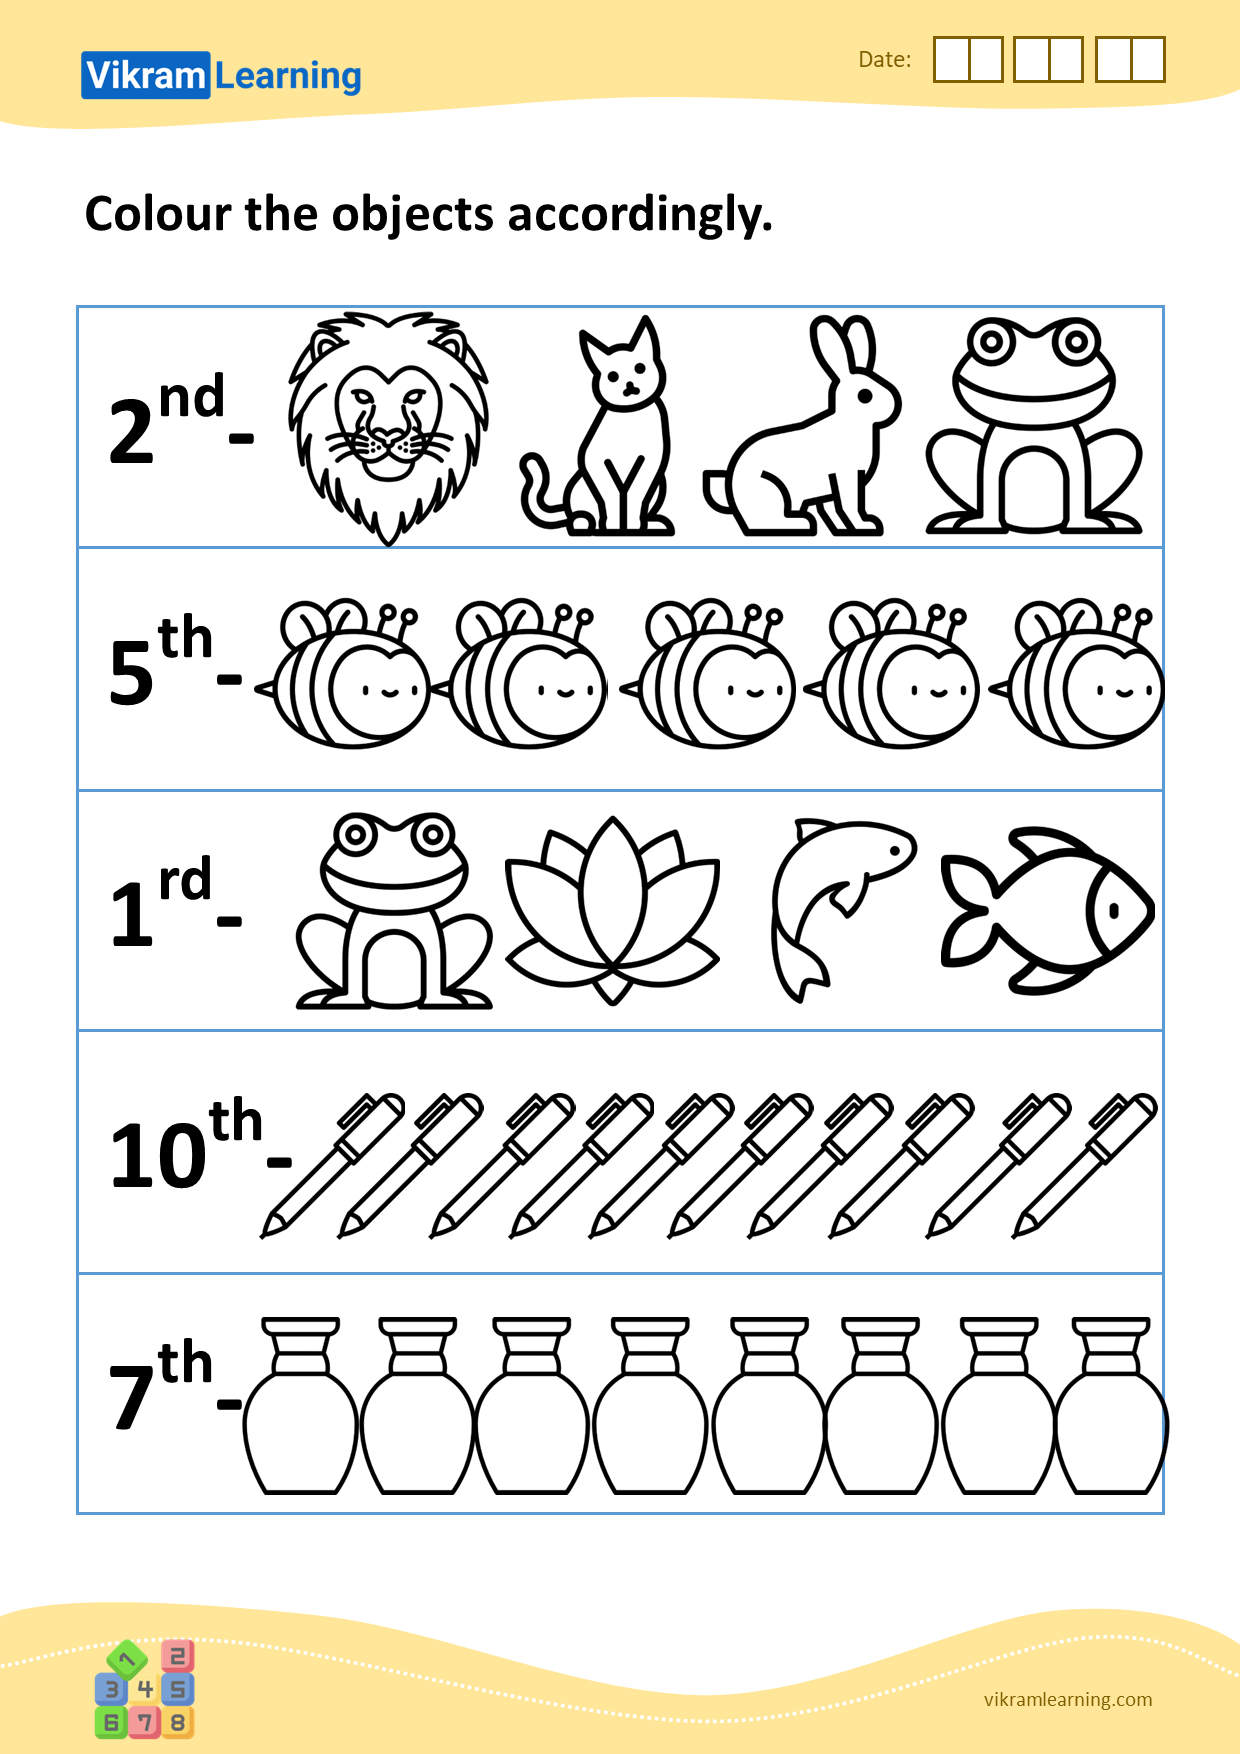 ordinal-numbers-find-and-color-3-ordinal-numbers-number-worksheets